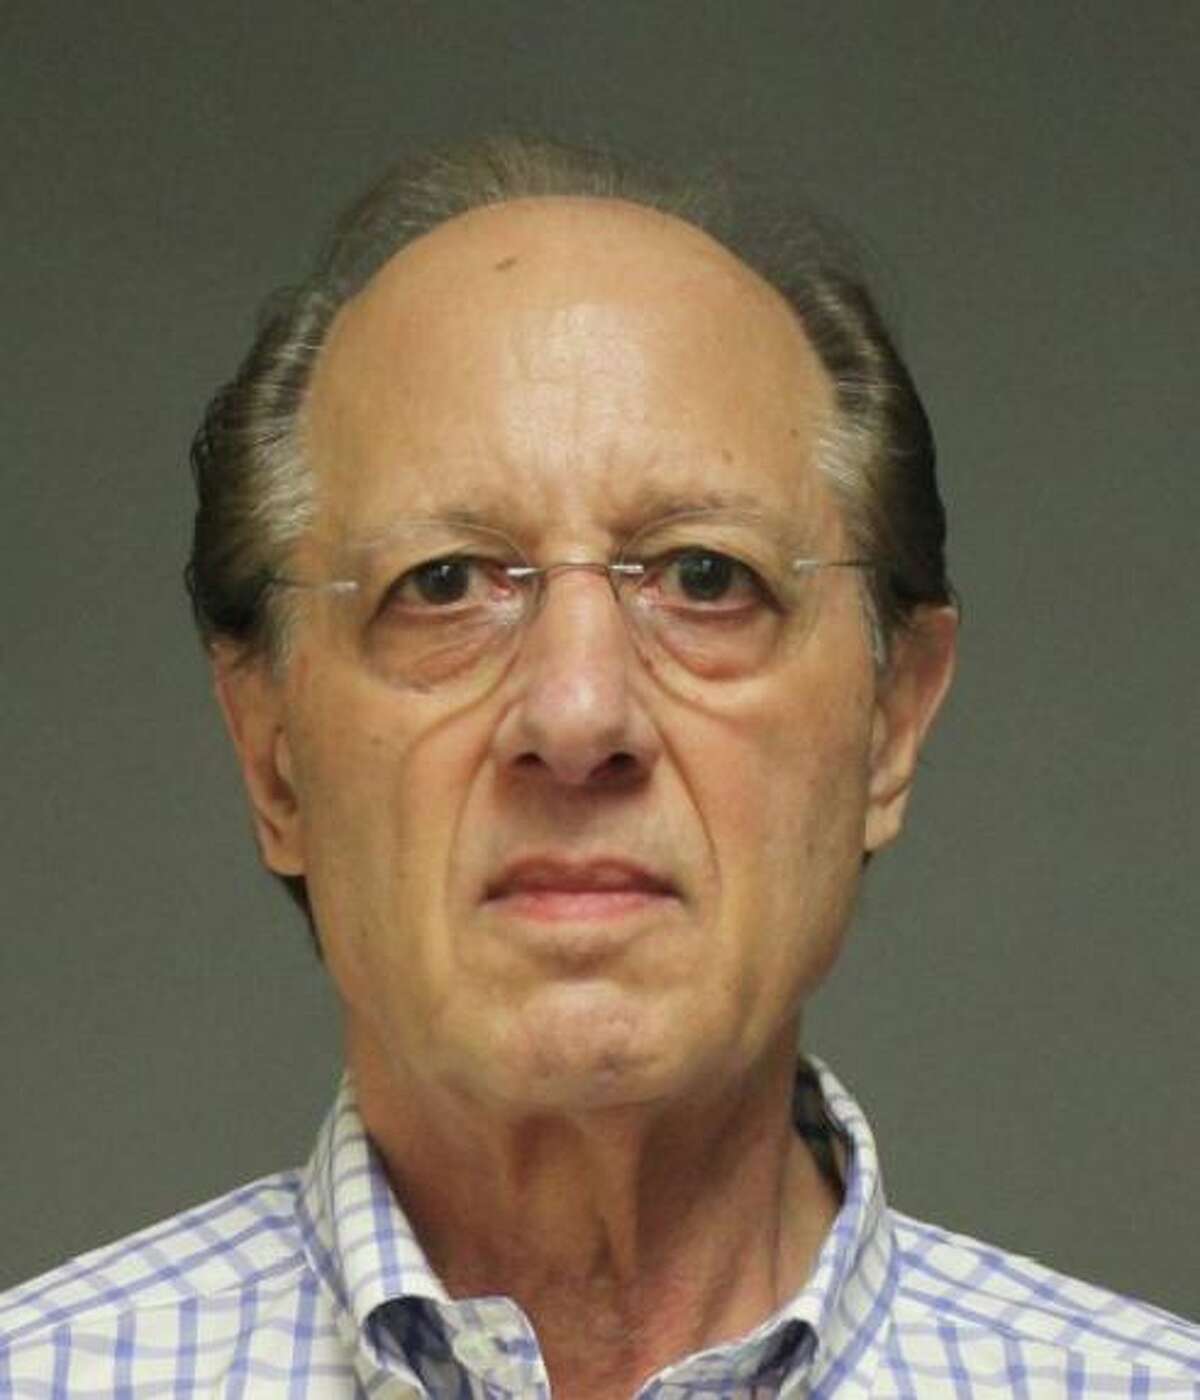 Former Fairfield Chief Fiscal Officer Robert Mayer pleaded not guilty to third-degree burglary, third-degree larceny and tampering with evidence among other charges.